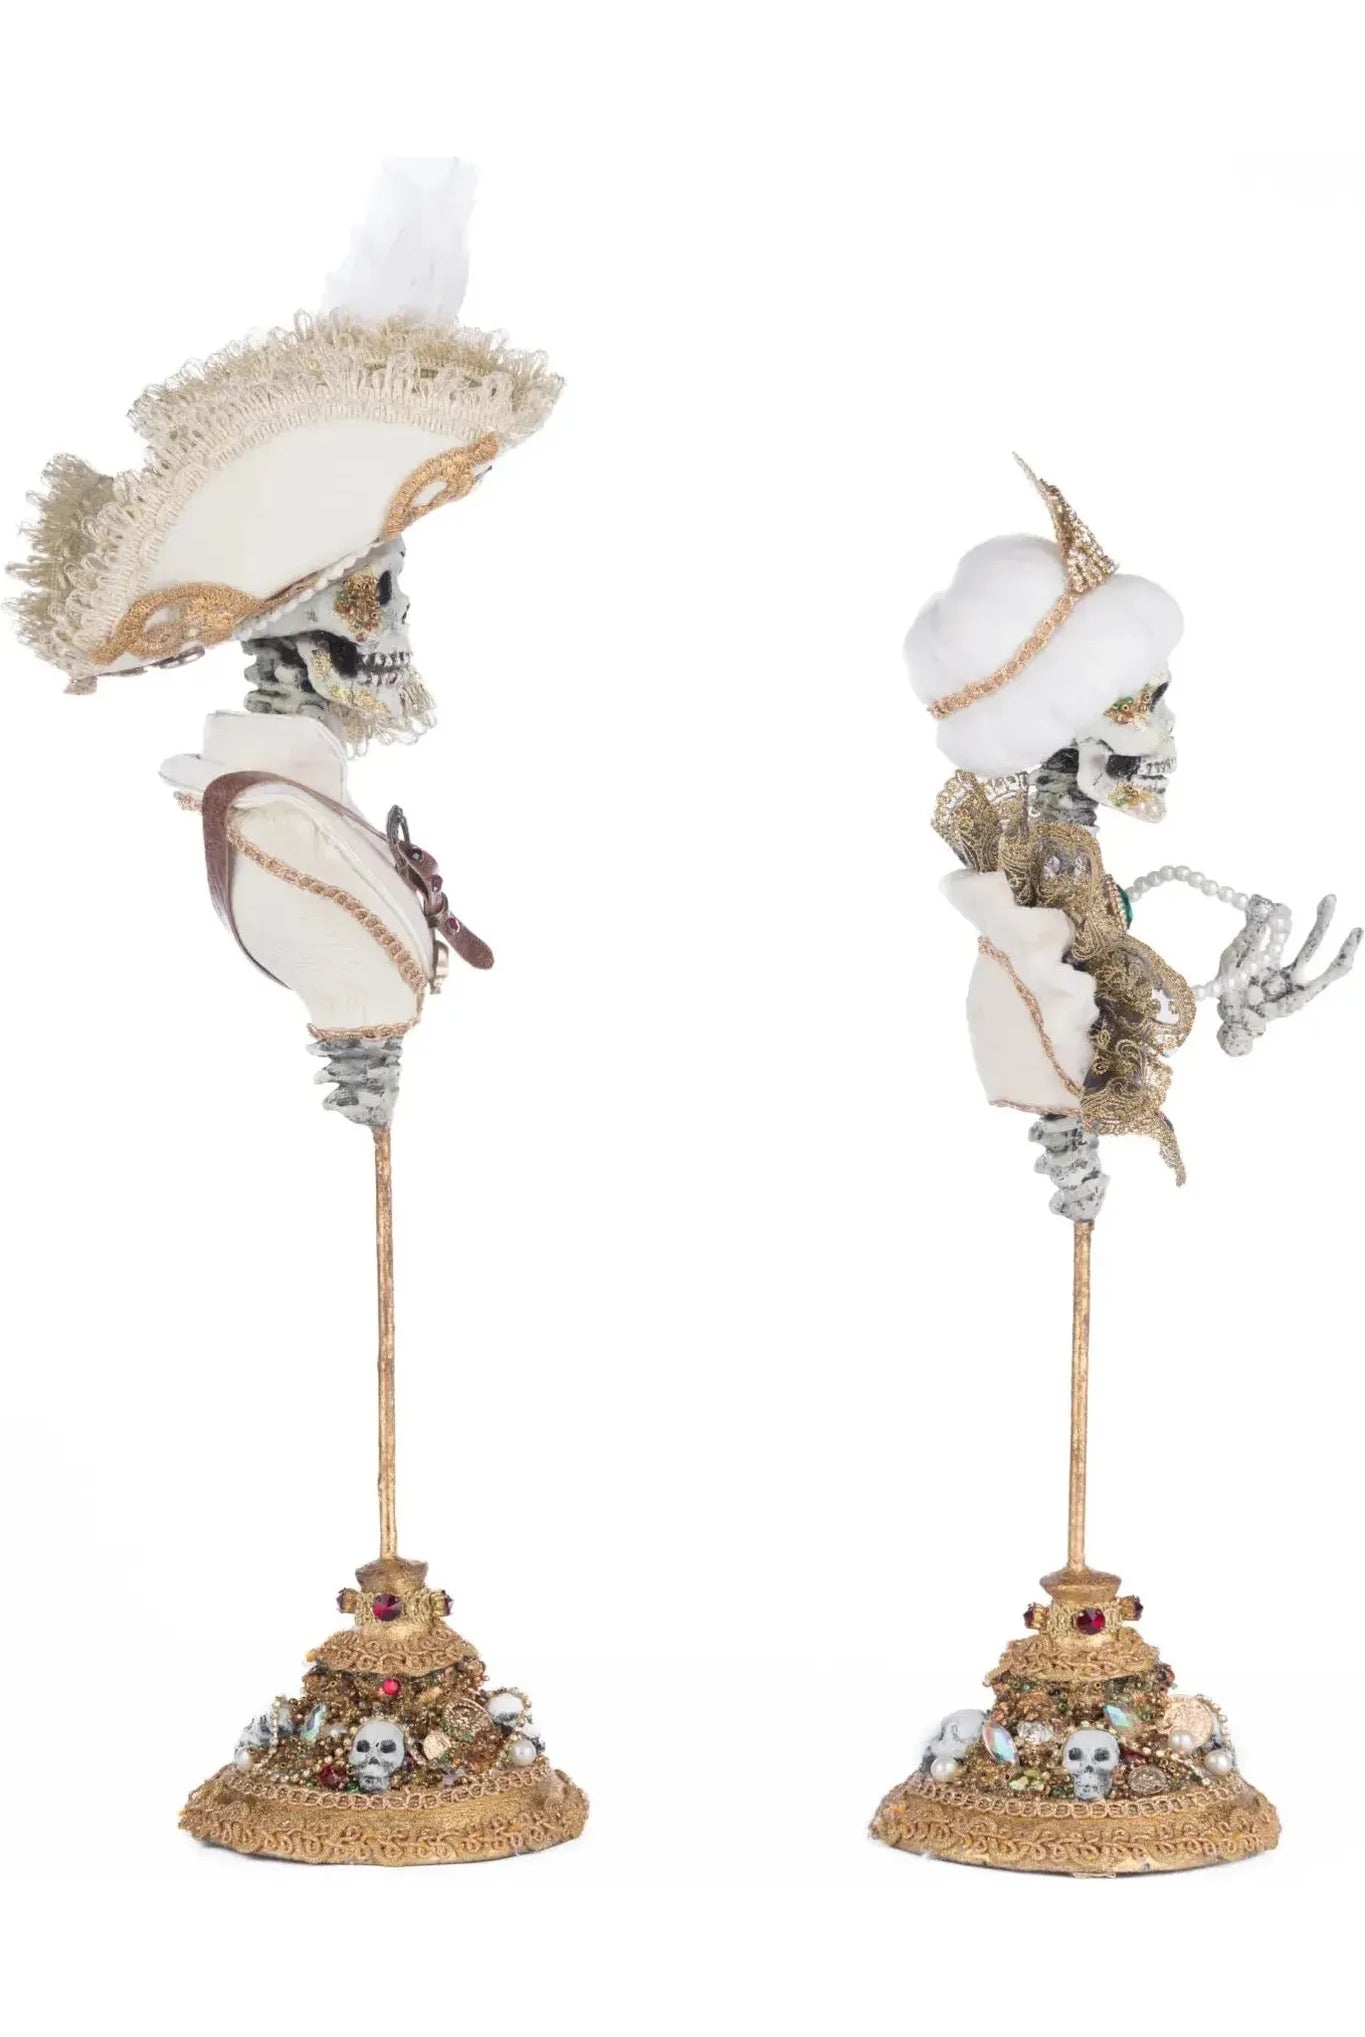 Shop For Male and Female Skeleton Bust Tabletop Assortment of 2 28-428223